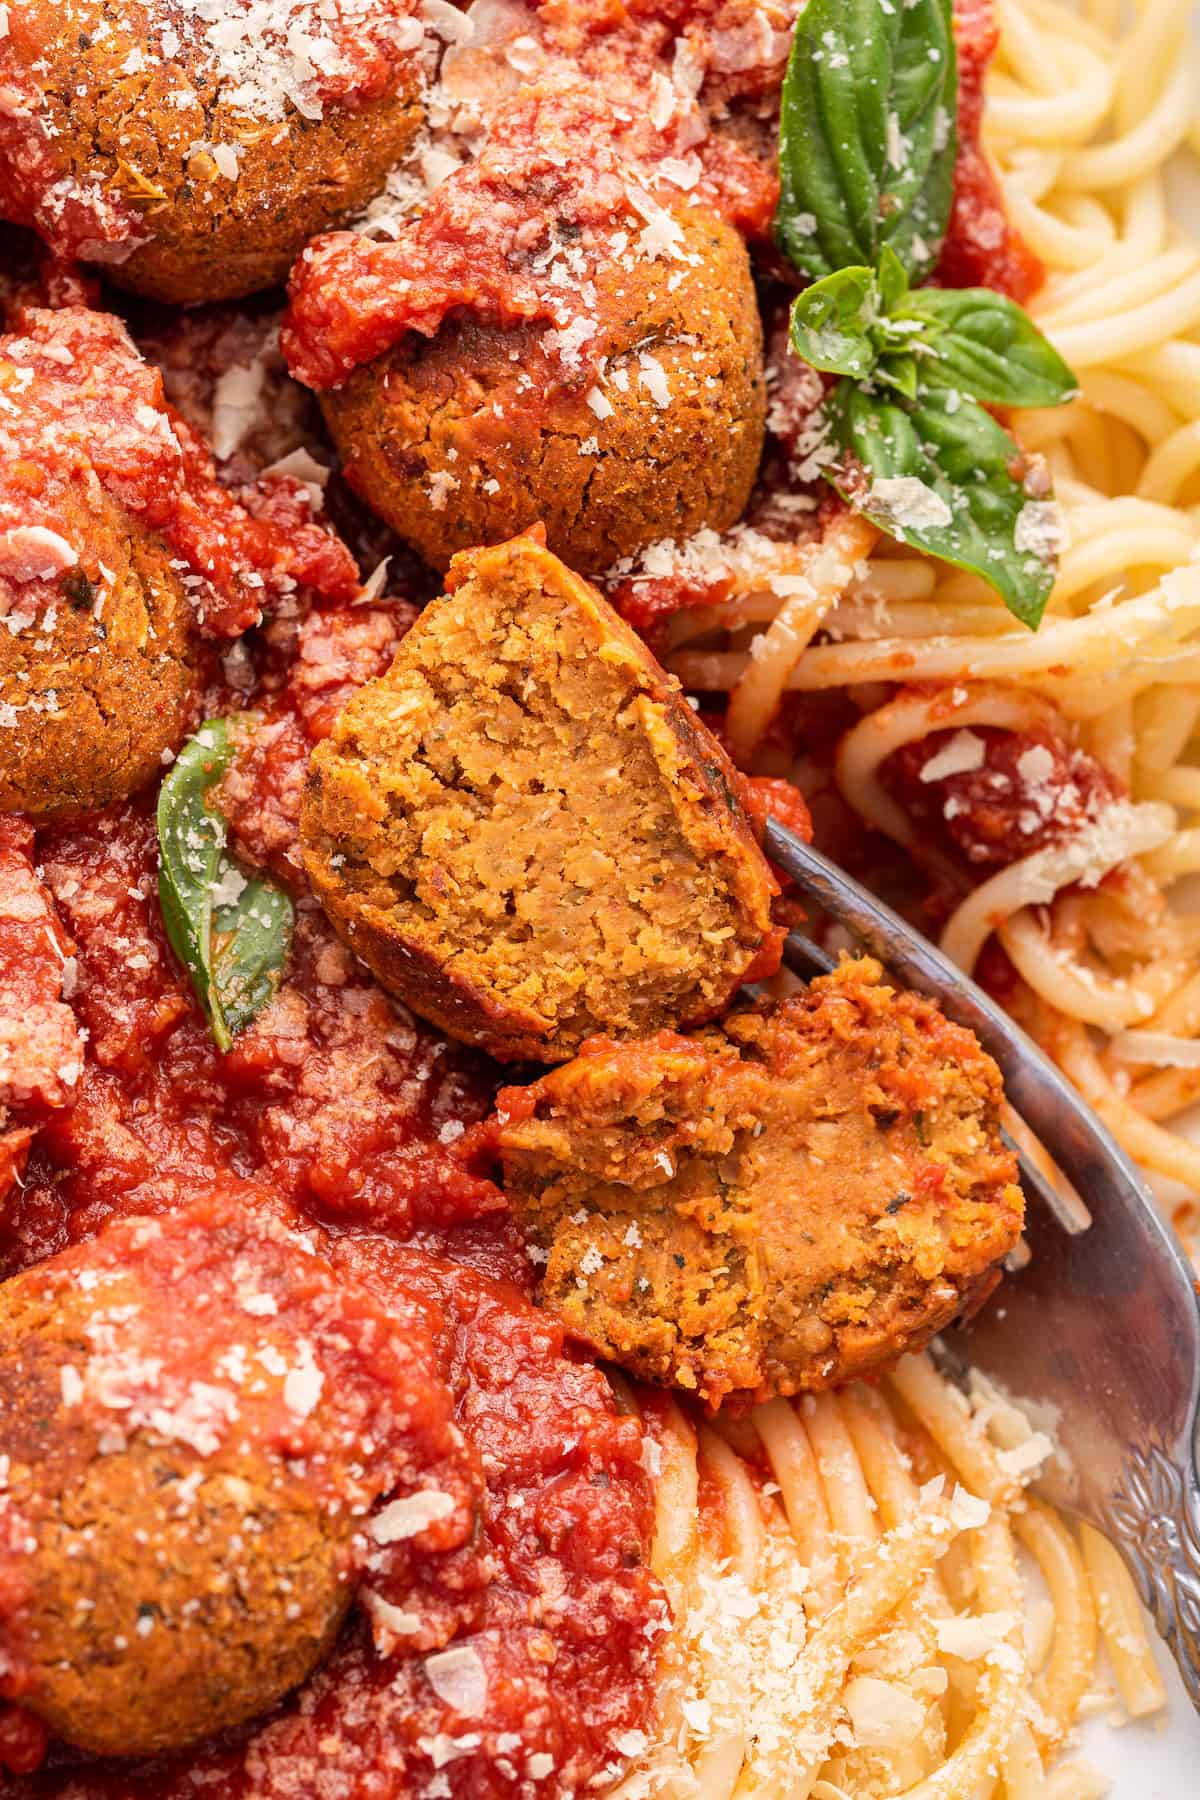 Closeup of vegan spaghetti and meatballs with one meatball cut open to show texture